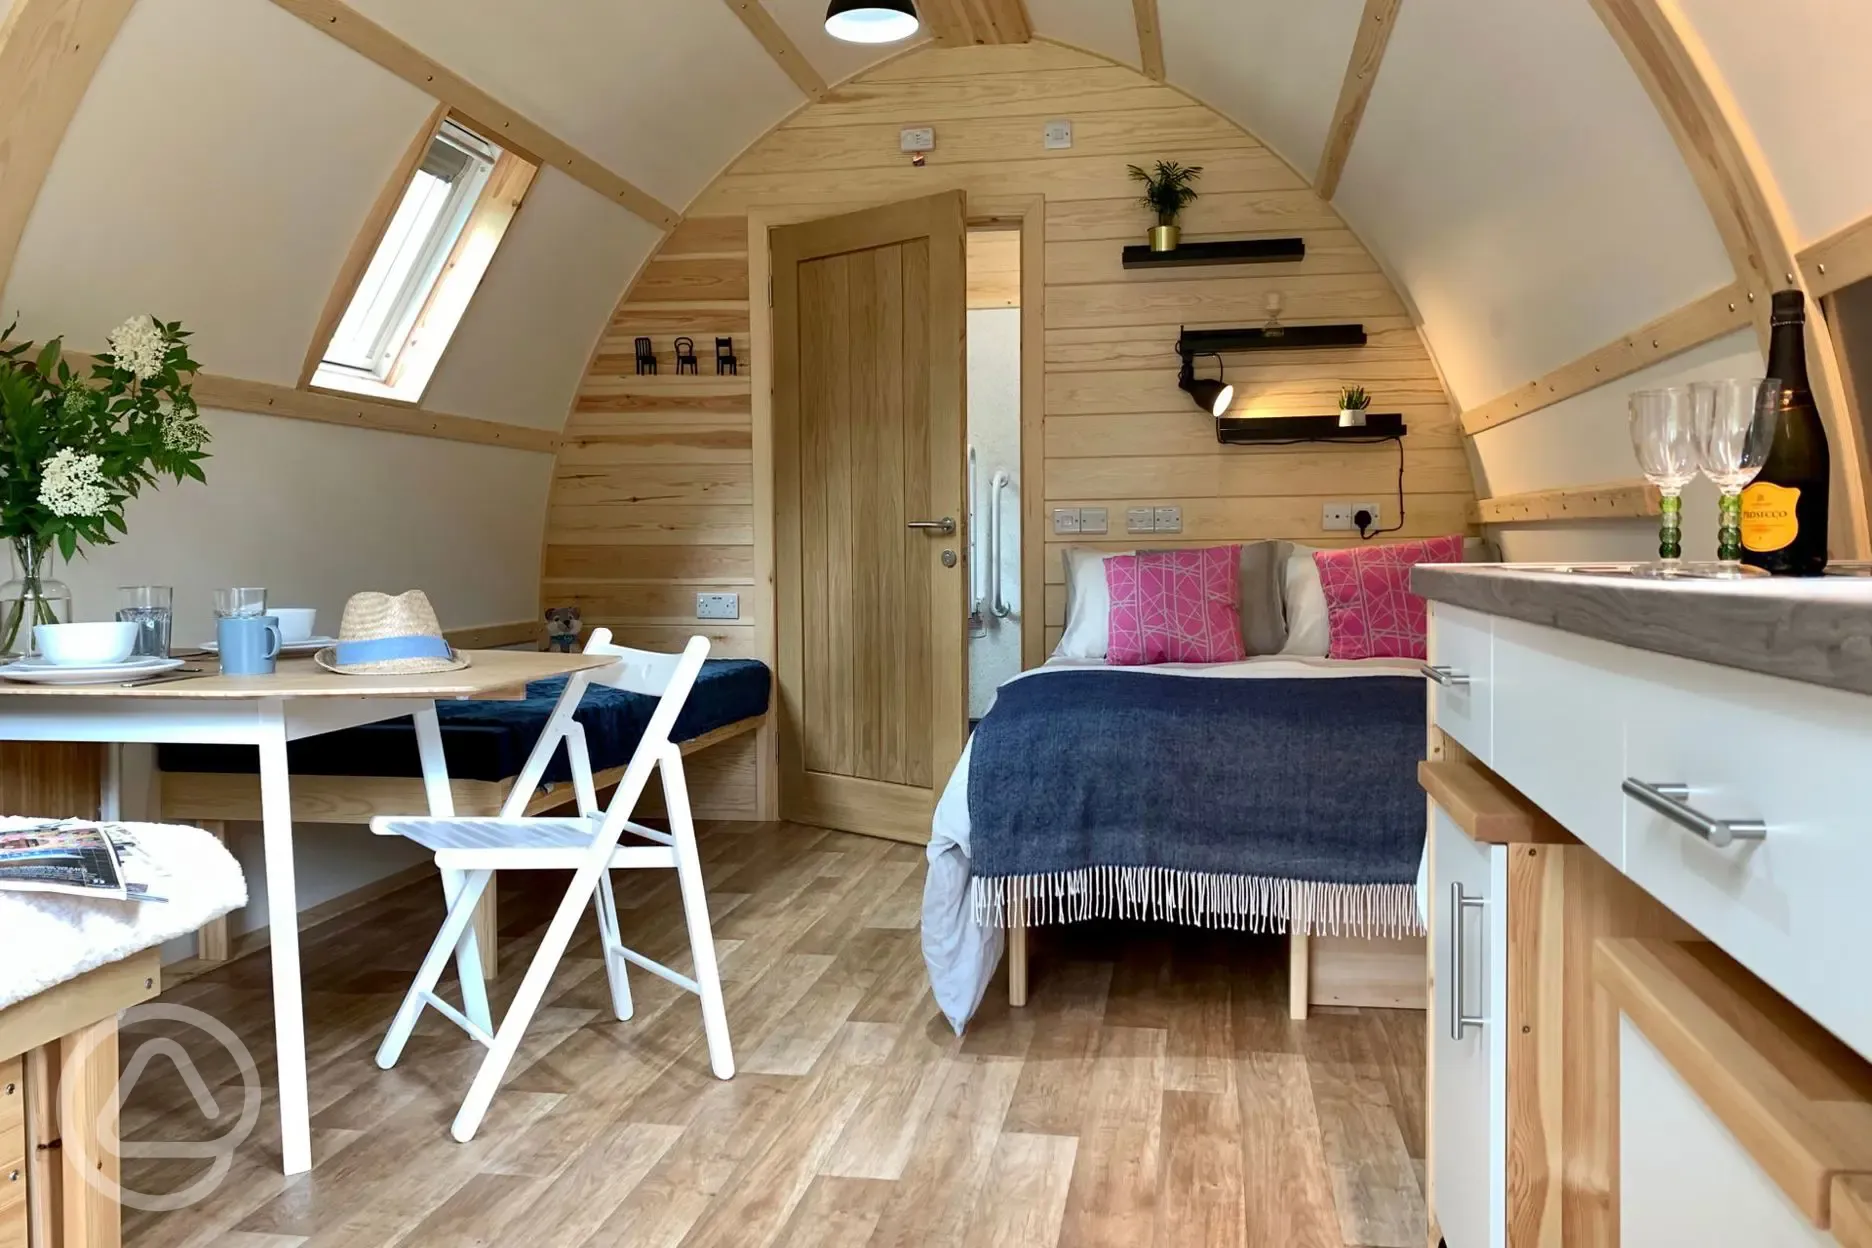 Ensuite deluxe Wigwam pod with hot tub interior